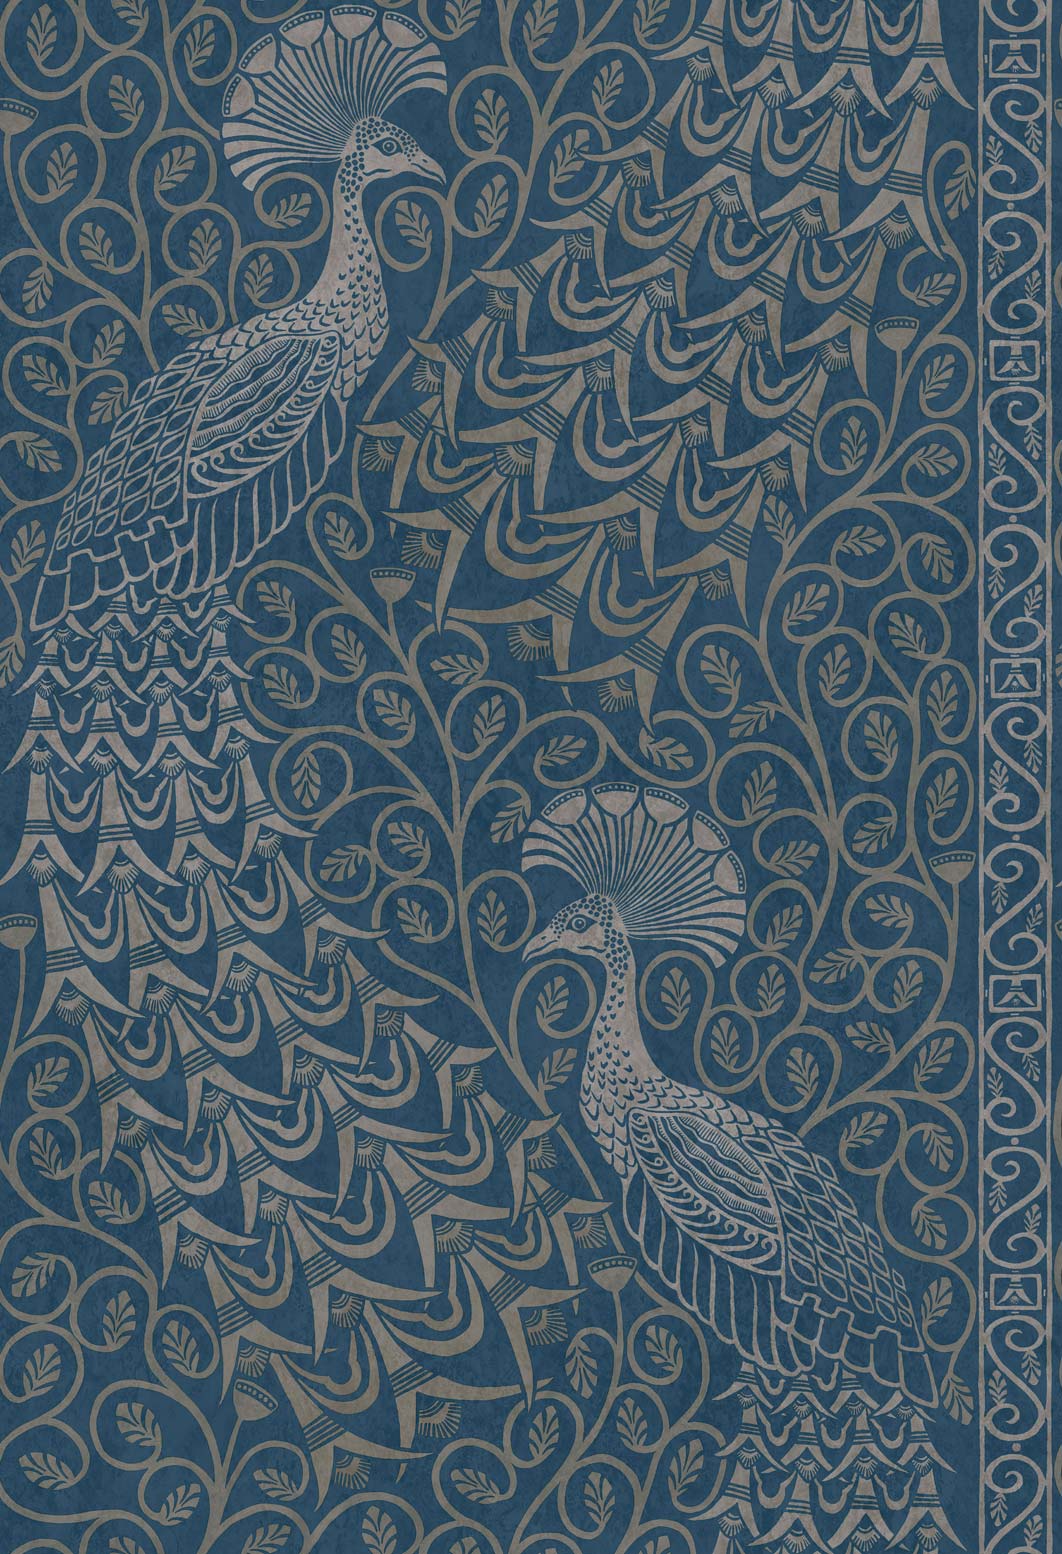 Wallpaper – Cole and Son – Pearwood – Pavo Parade – Metallic Silver on Denim